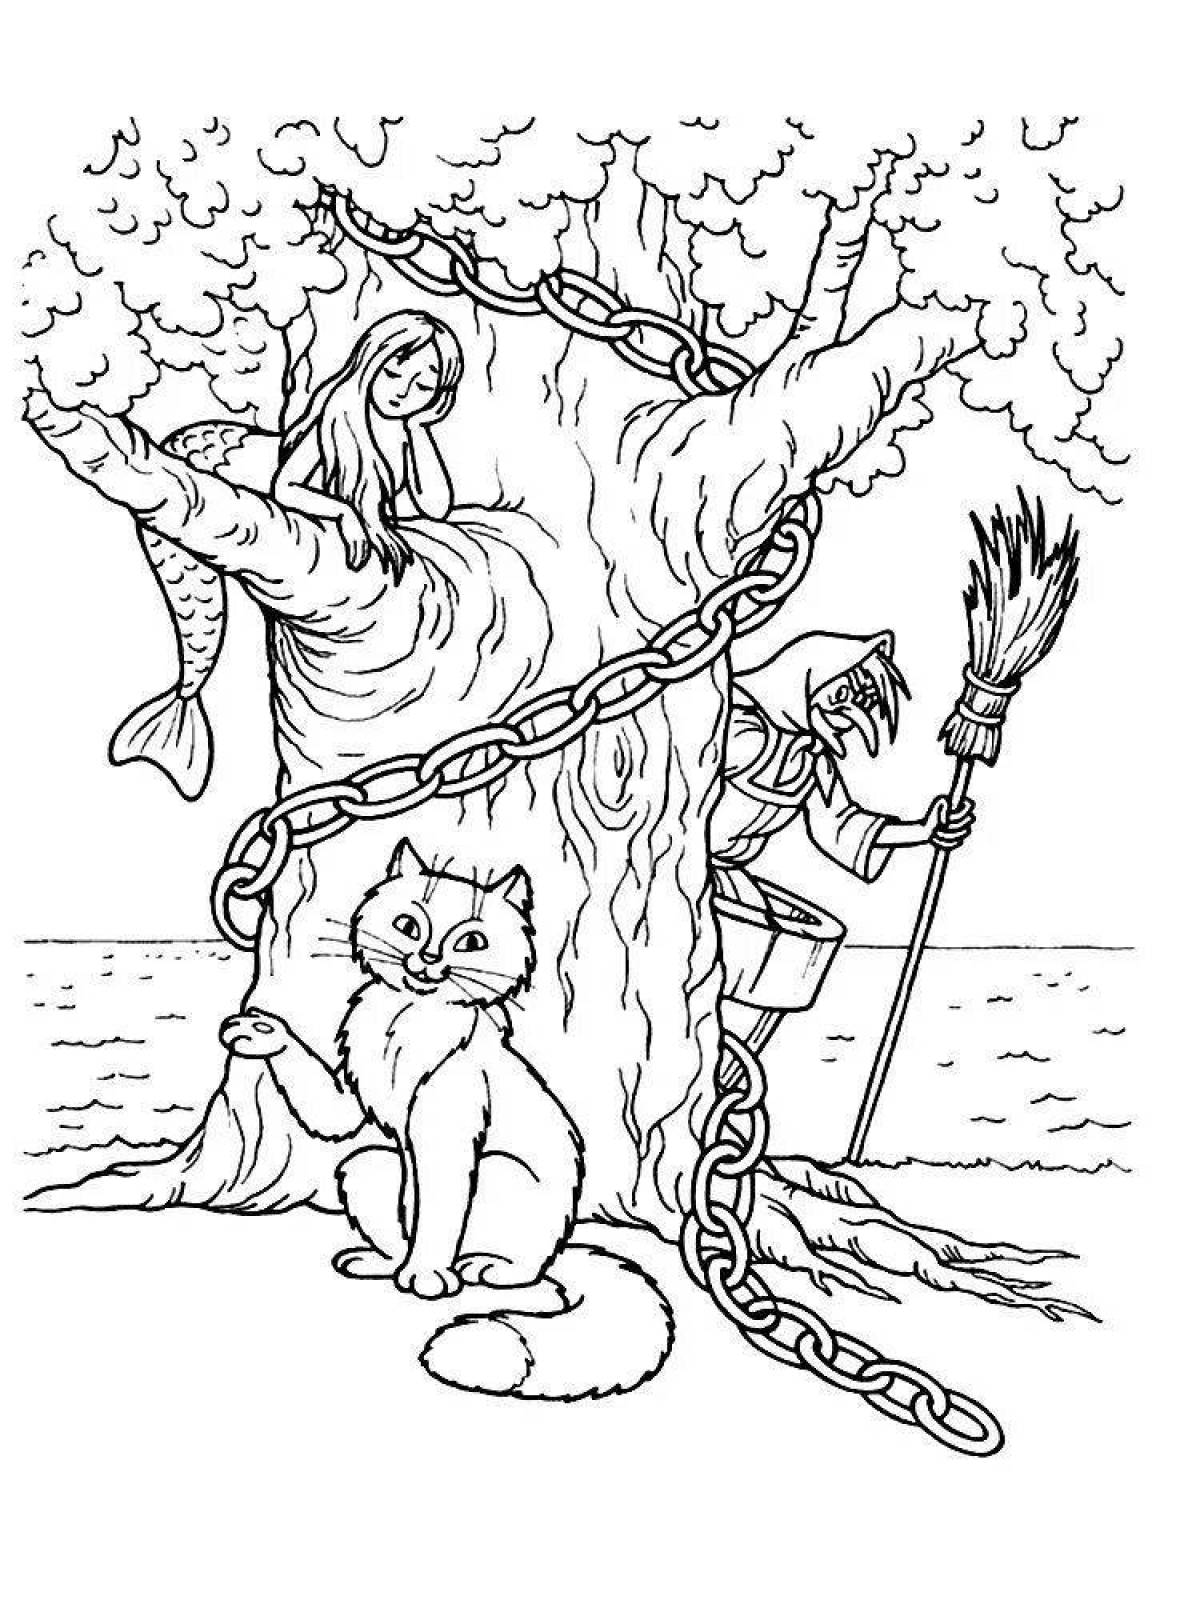 Creative coloring book based on Pushkin's fairy tales for preschoolers